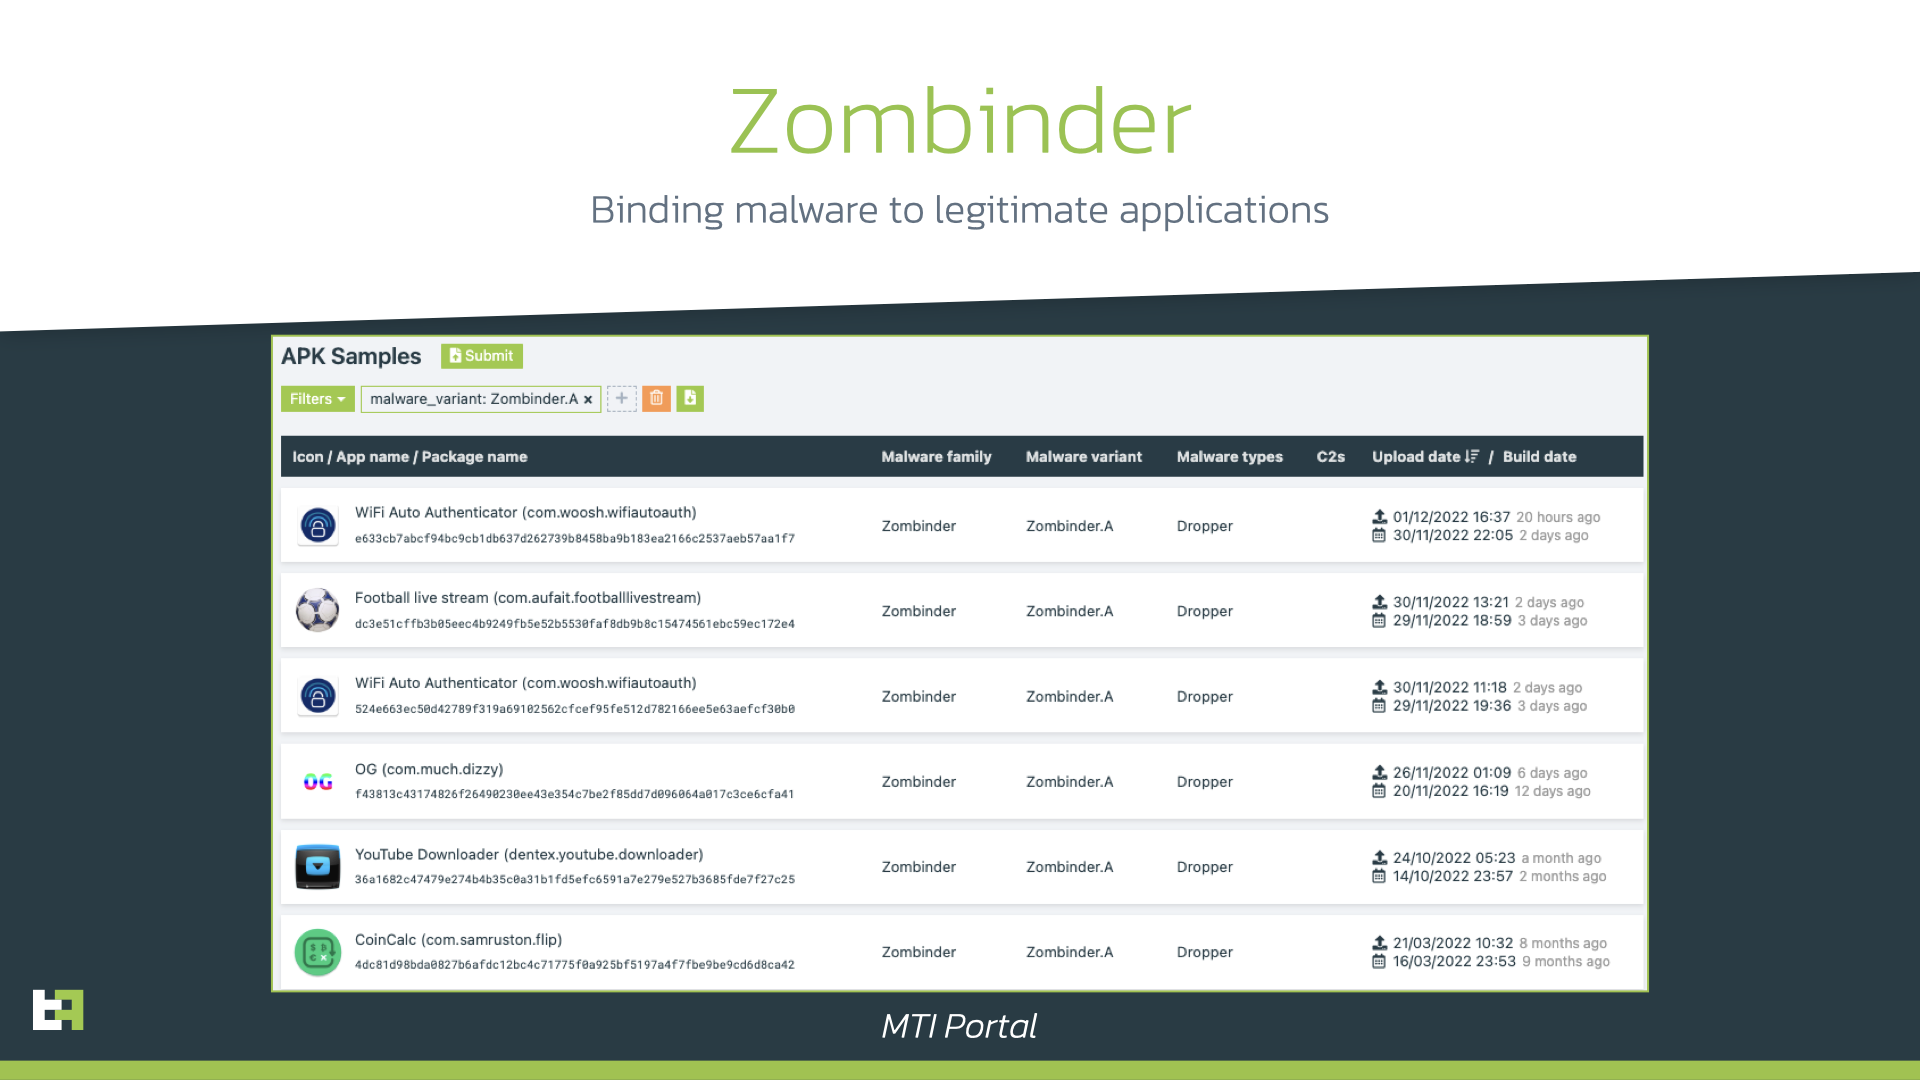 Zombinder APK binding service used in multiple malware attacks